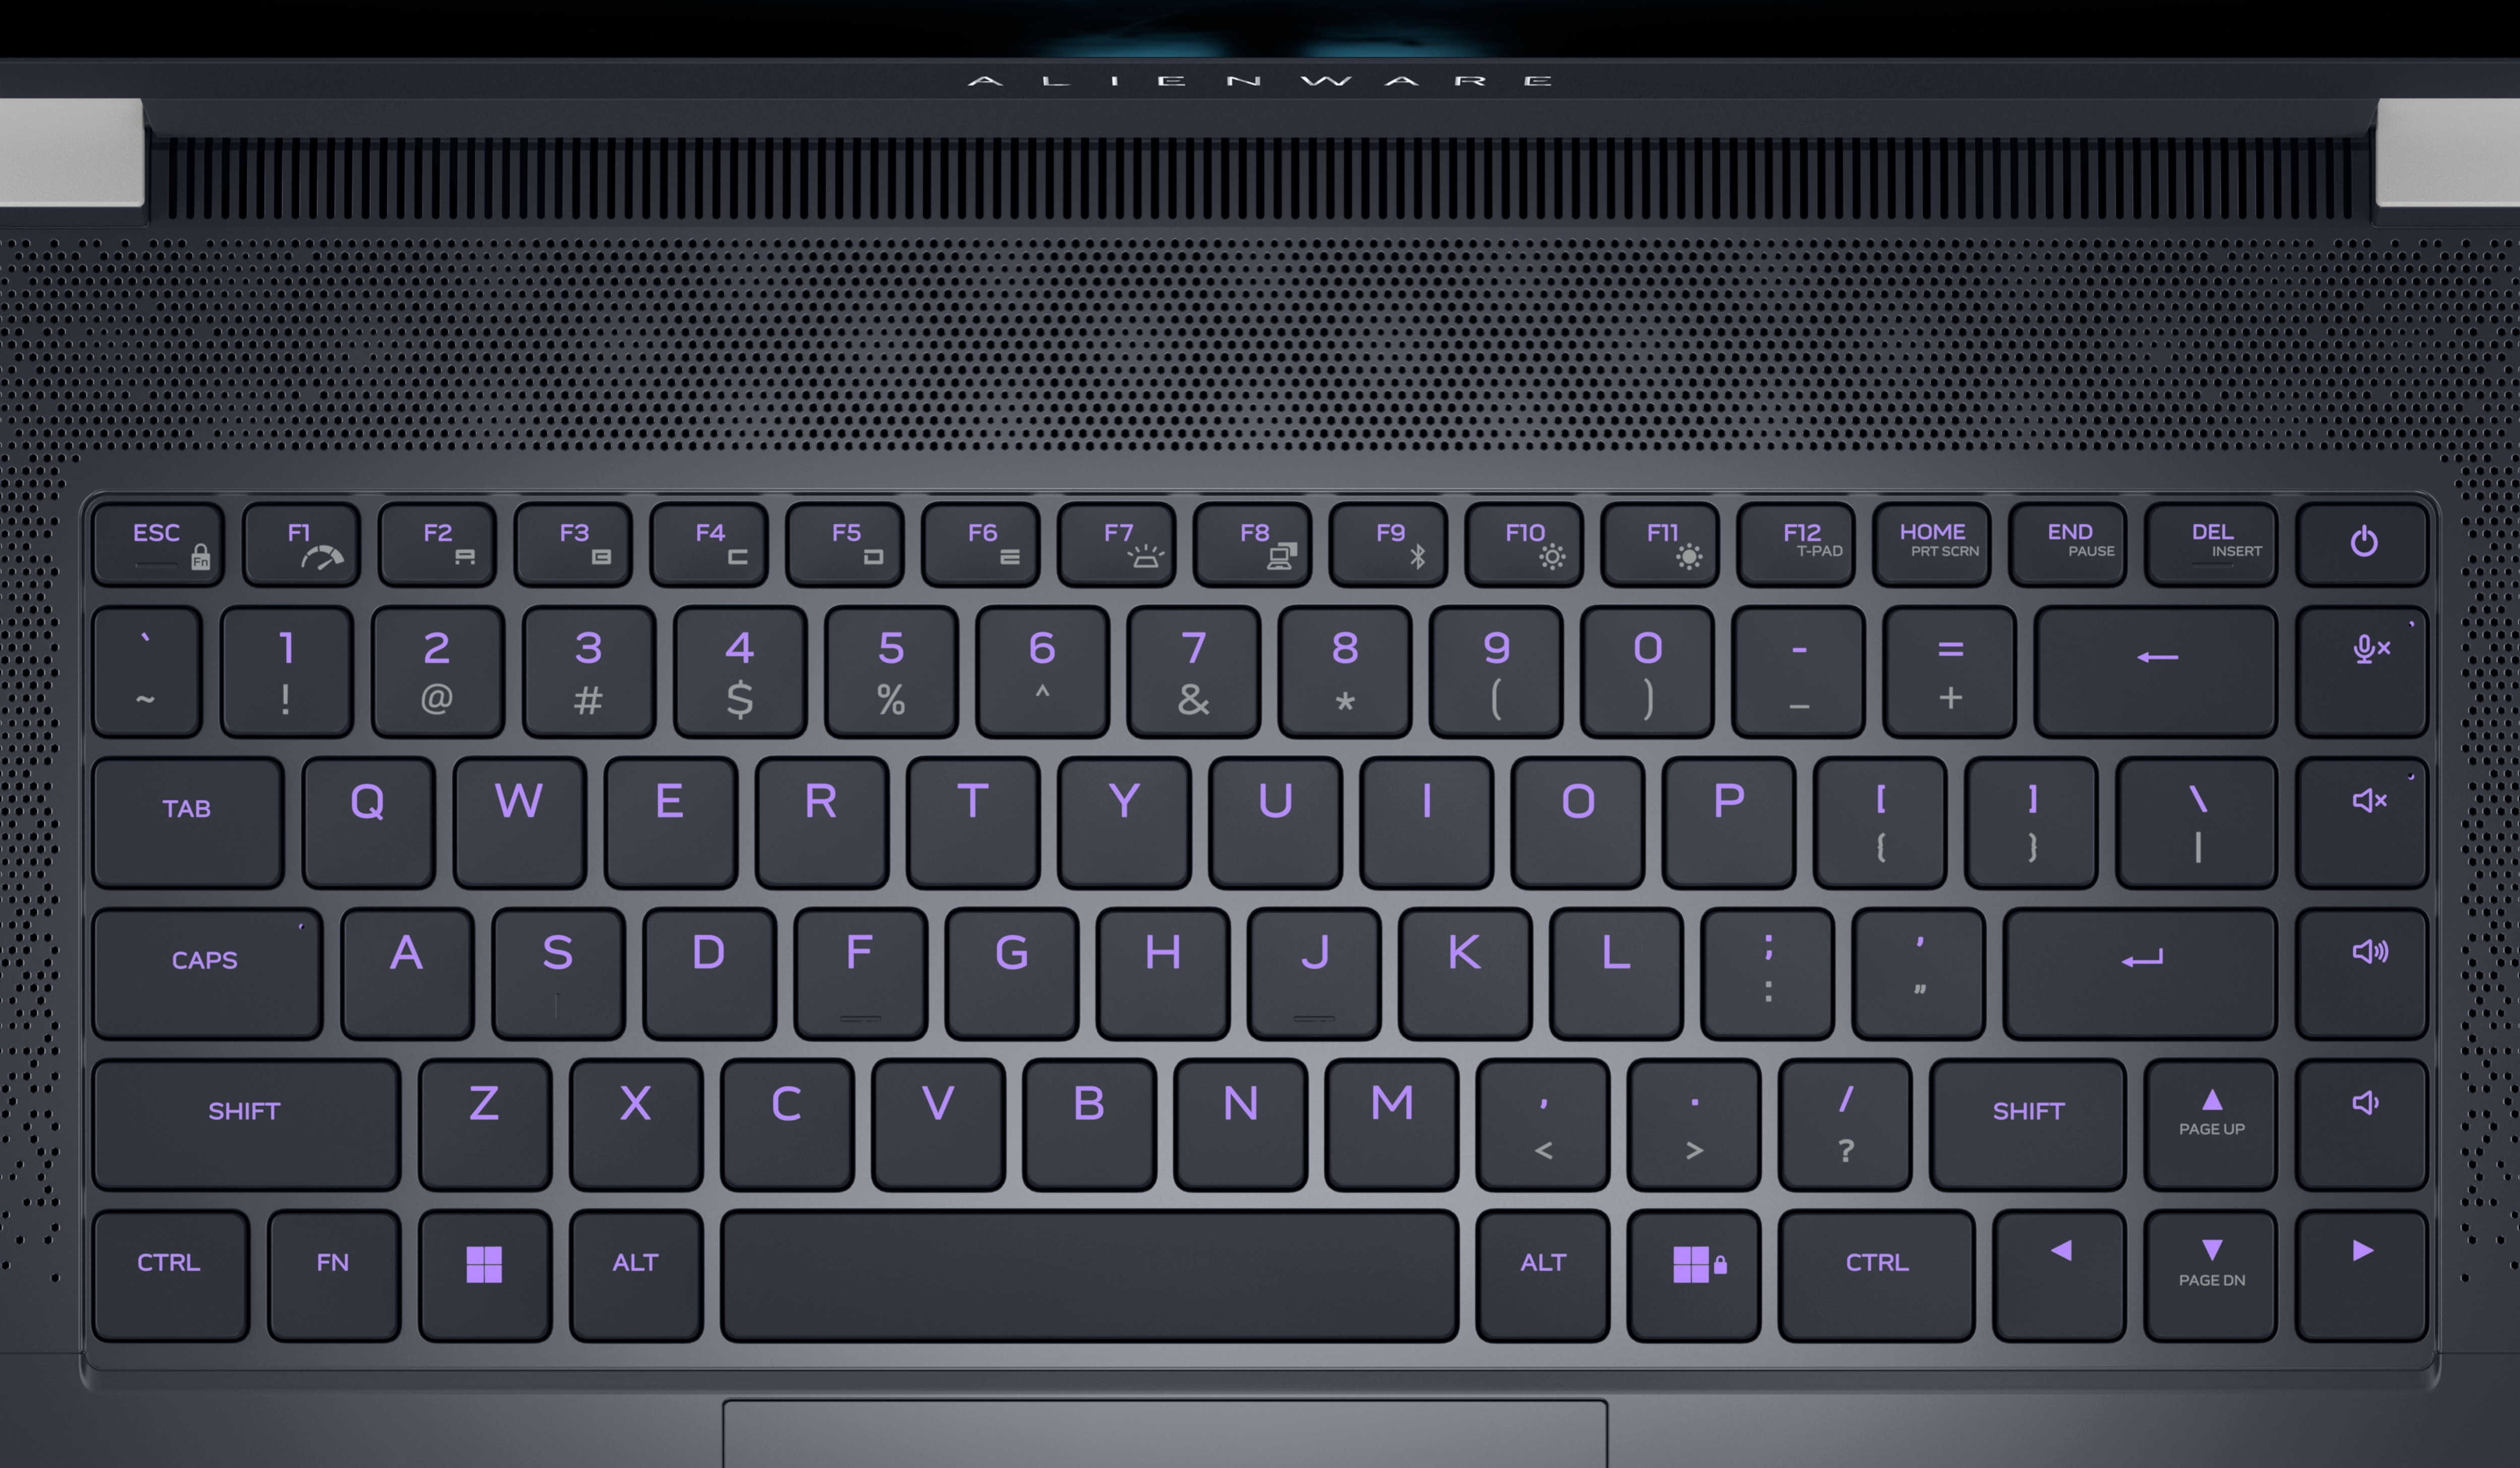 Picture of a Dell Alienware X14 Gaming Laptop keyboard seen from above.